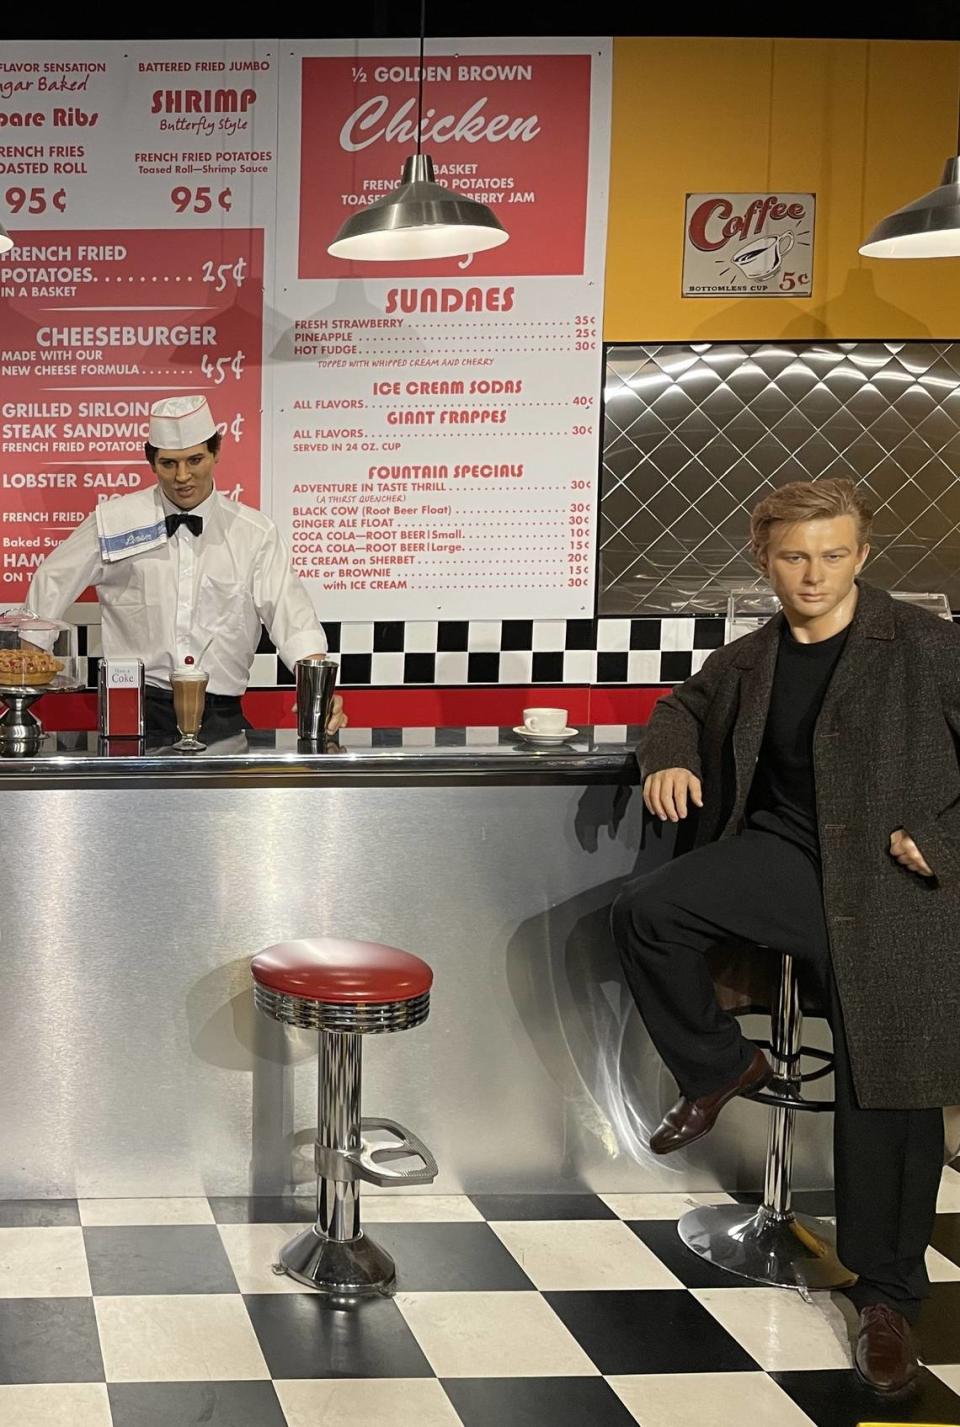 Elvis Presley might make a visit to the Hollywood Wax Museum in Myrtle Beach to see himself portrayed as an attendant at a soda fountain. He’s surrounded by other icons, such as James Dean.